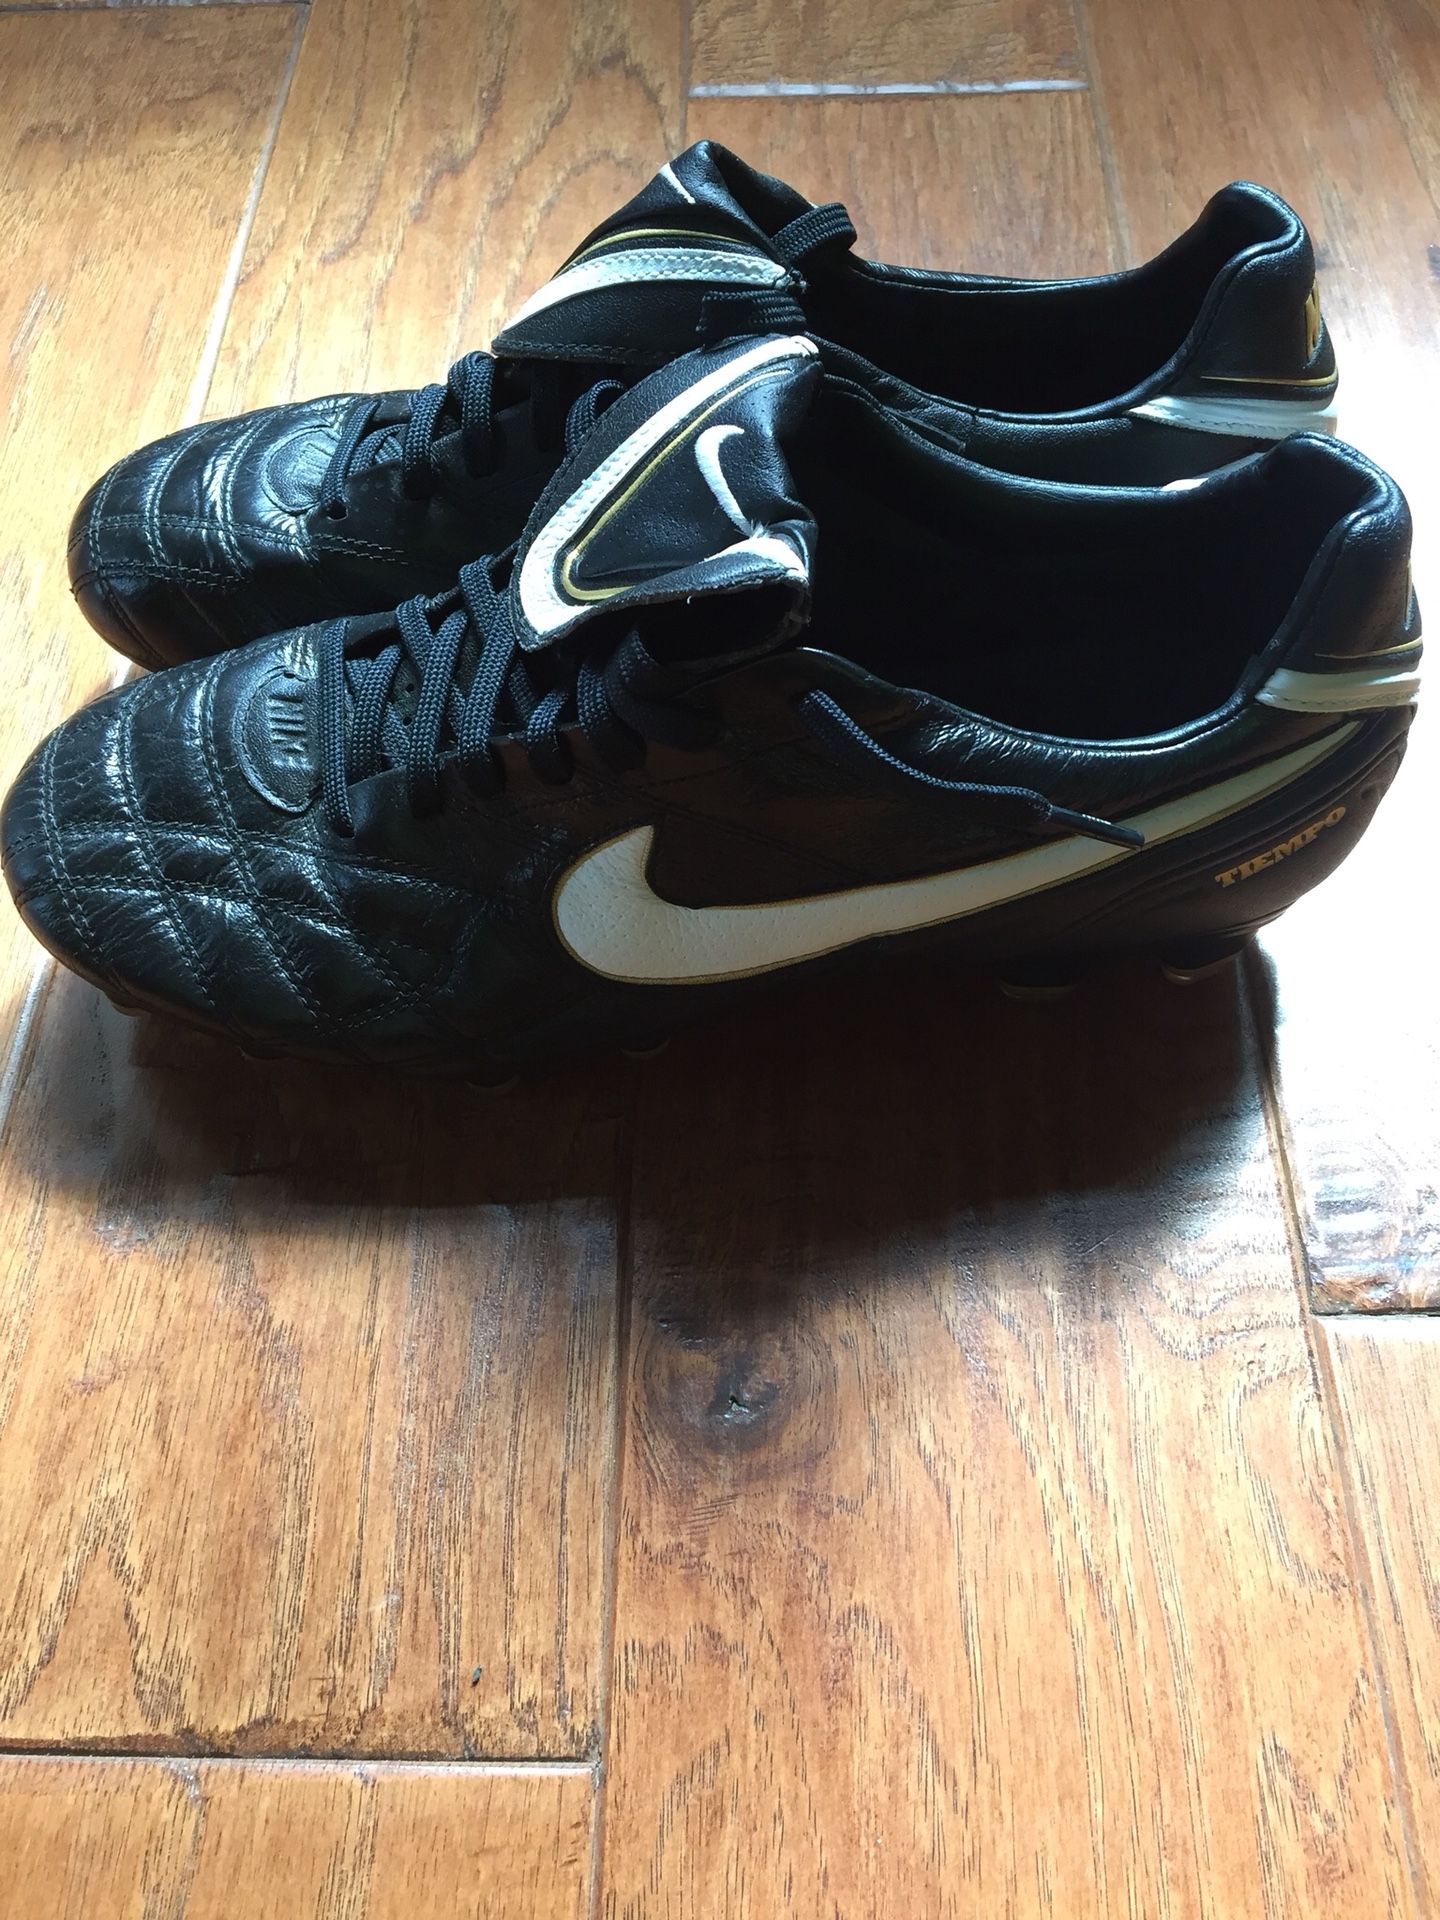 Nike Tiempo leather Soccer Cleats